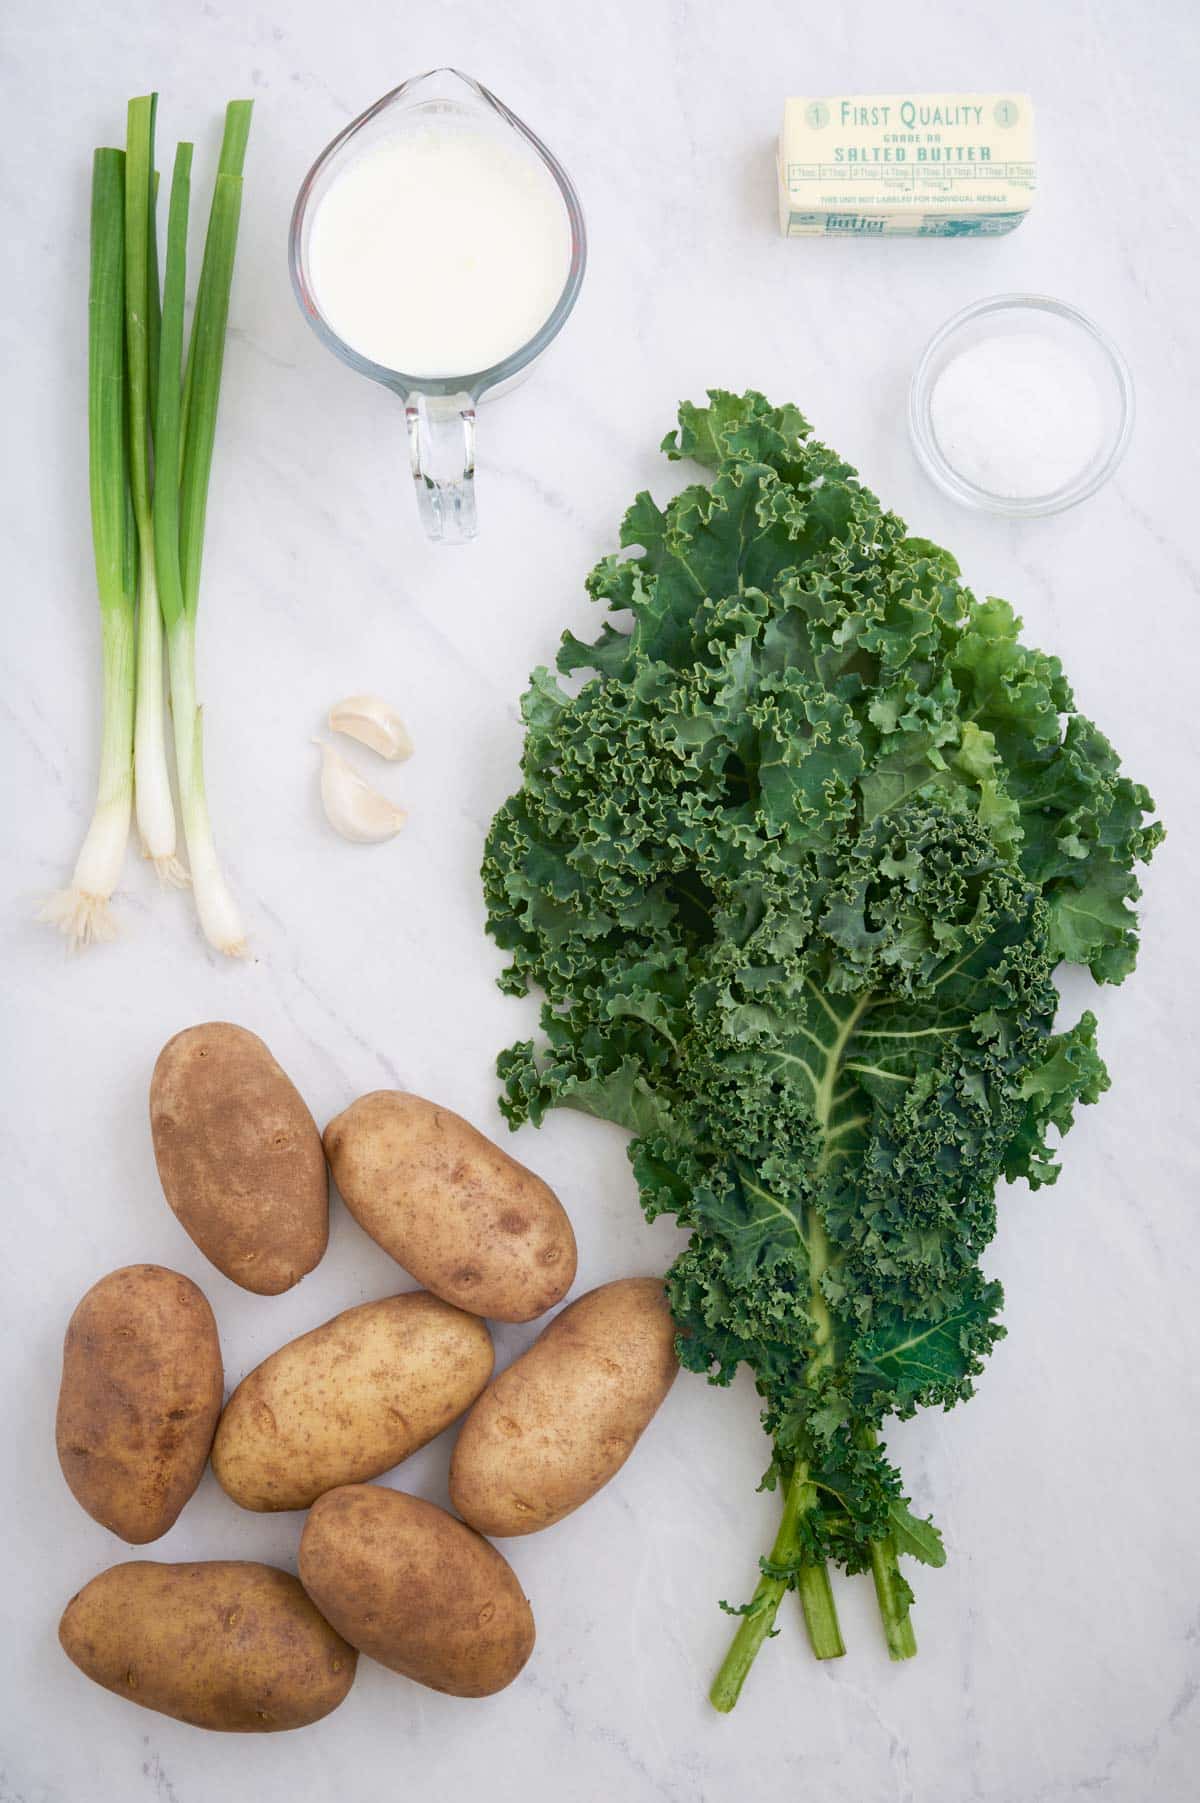 Potatoes, kale, garlic, milk, and salt are the ingredients for this dish.